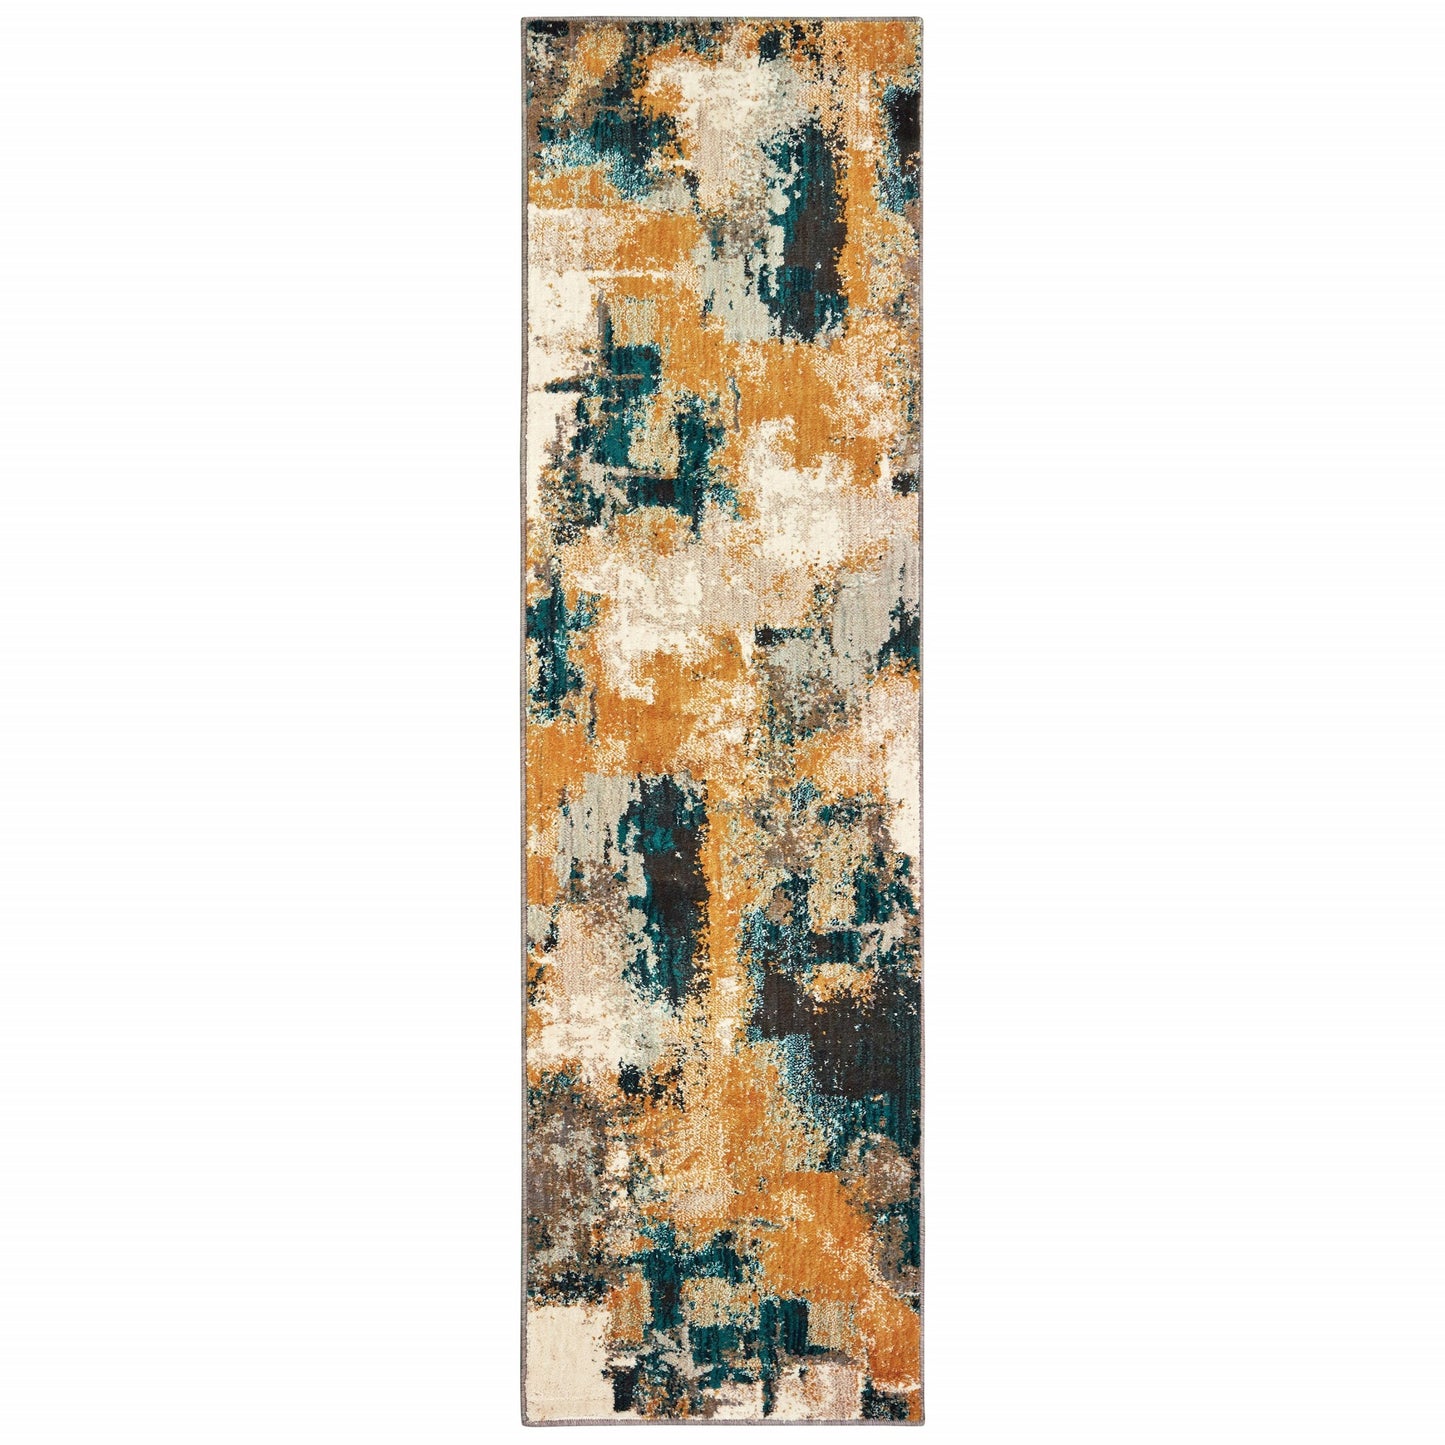 2’X3’ Blue And Gold Abstract Strokes Scatter Rug